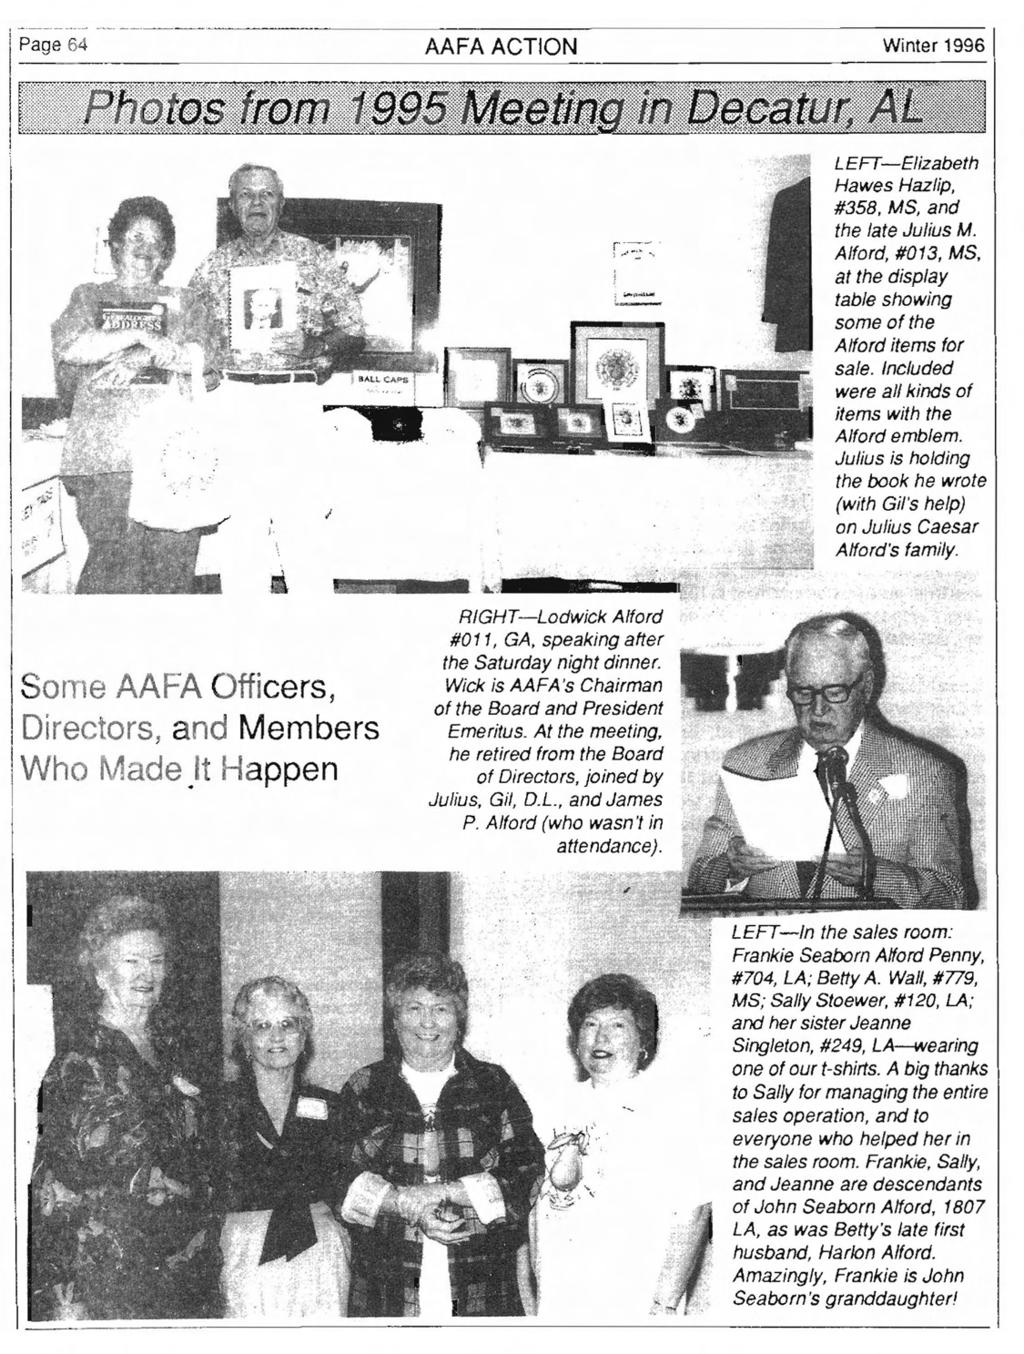 I P~g~-64 ------.~--.- MFA ACTION Winter 1996 LEFT-Elizabeth Hawes Hazlip, #358. MS, and the late Julius M. Alford, #013, MS, at the display table showing some of the Alford items for sale.